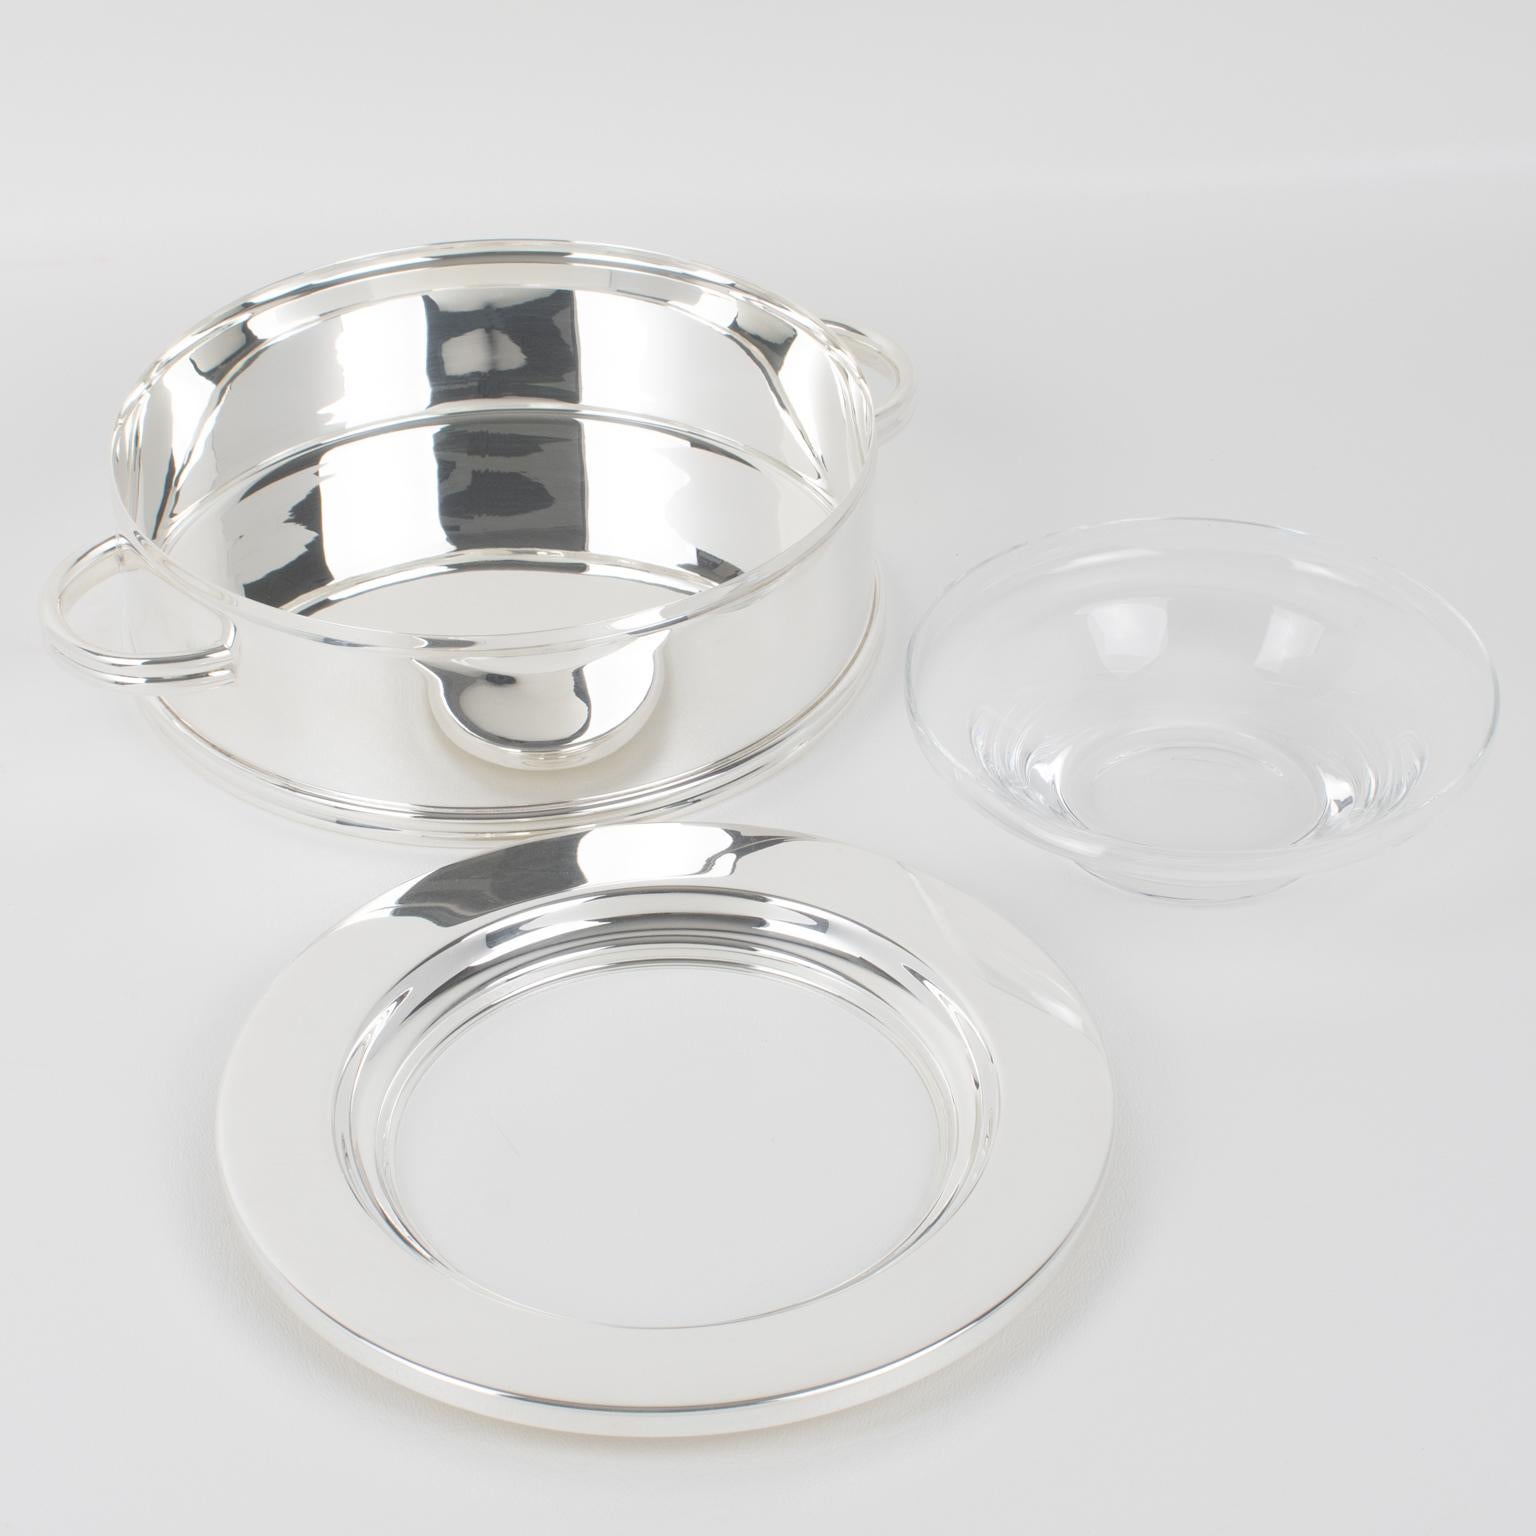 Metal Silver Plate and Crystal Caviar Bowl Dish Server by St Hilaire, Paris